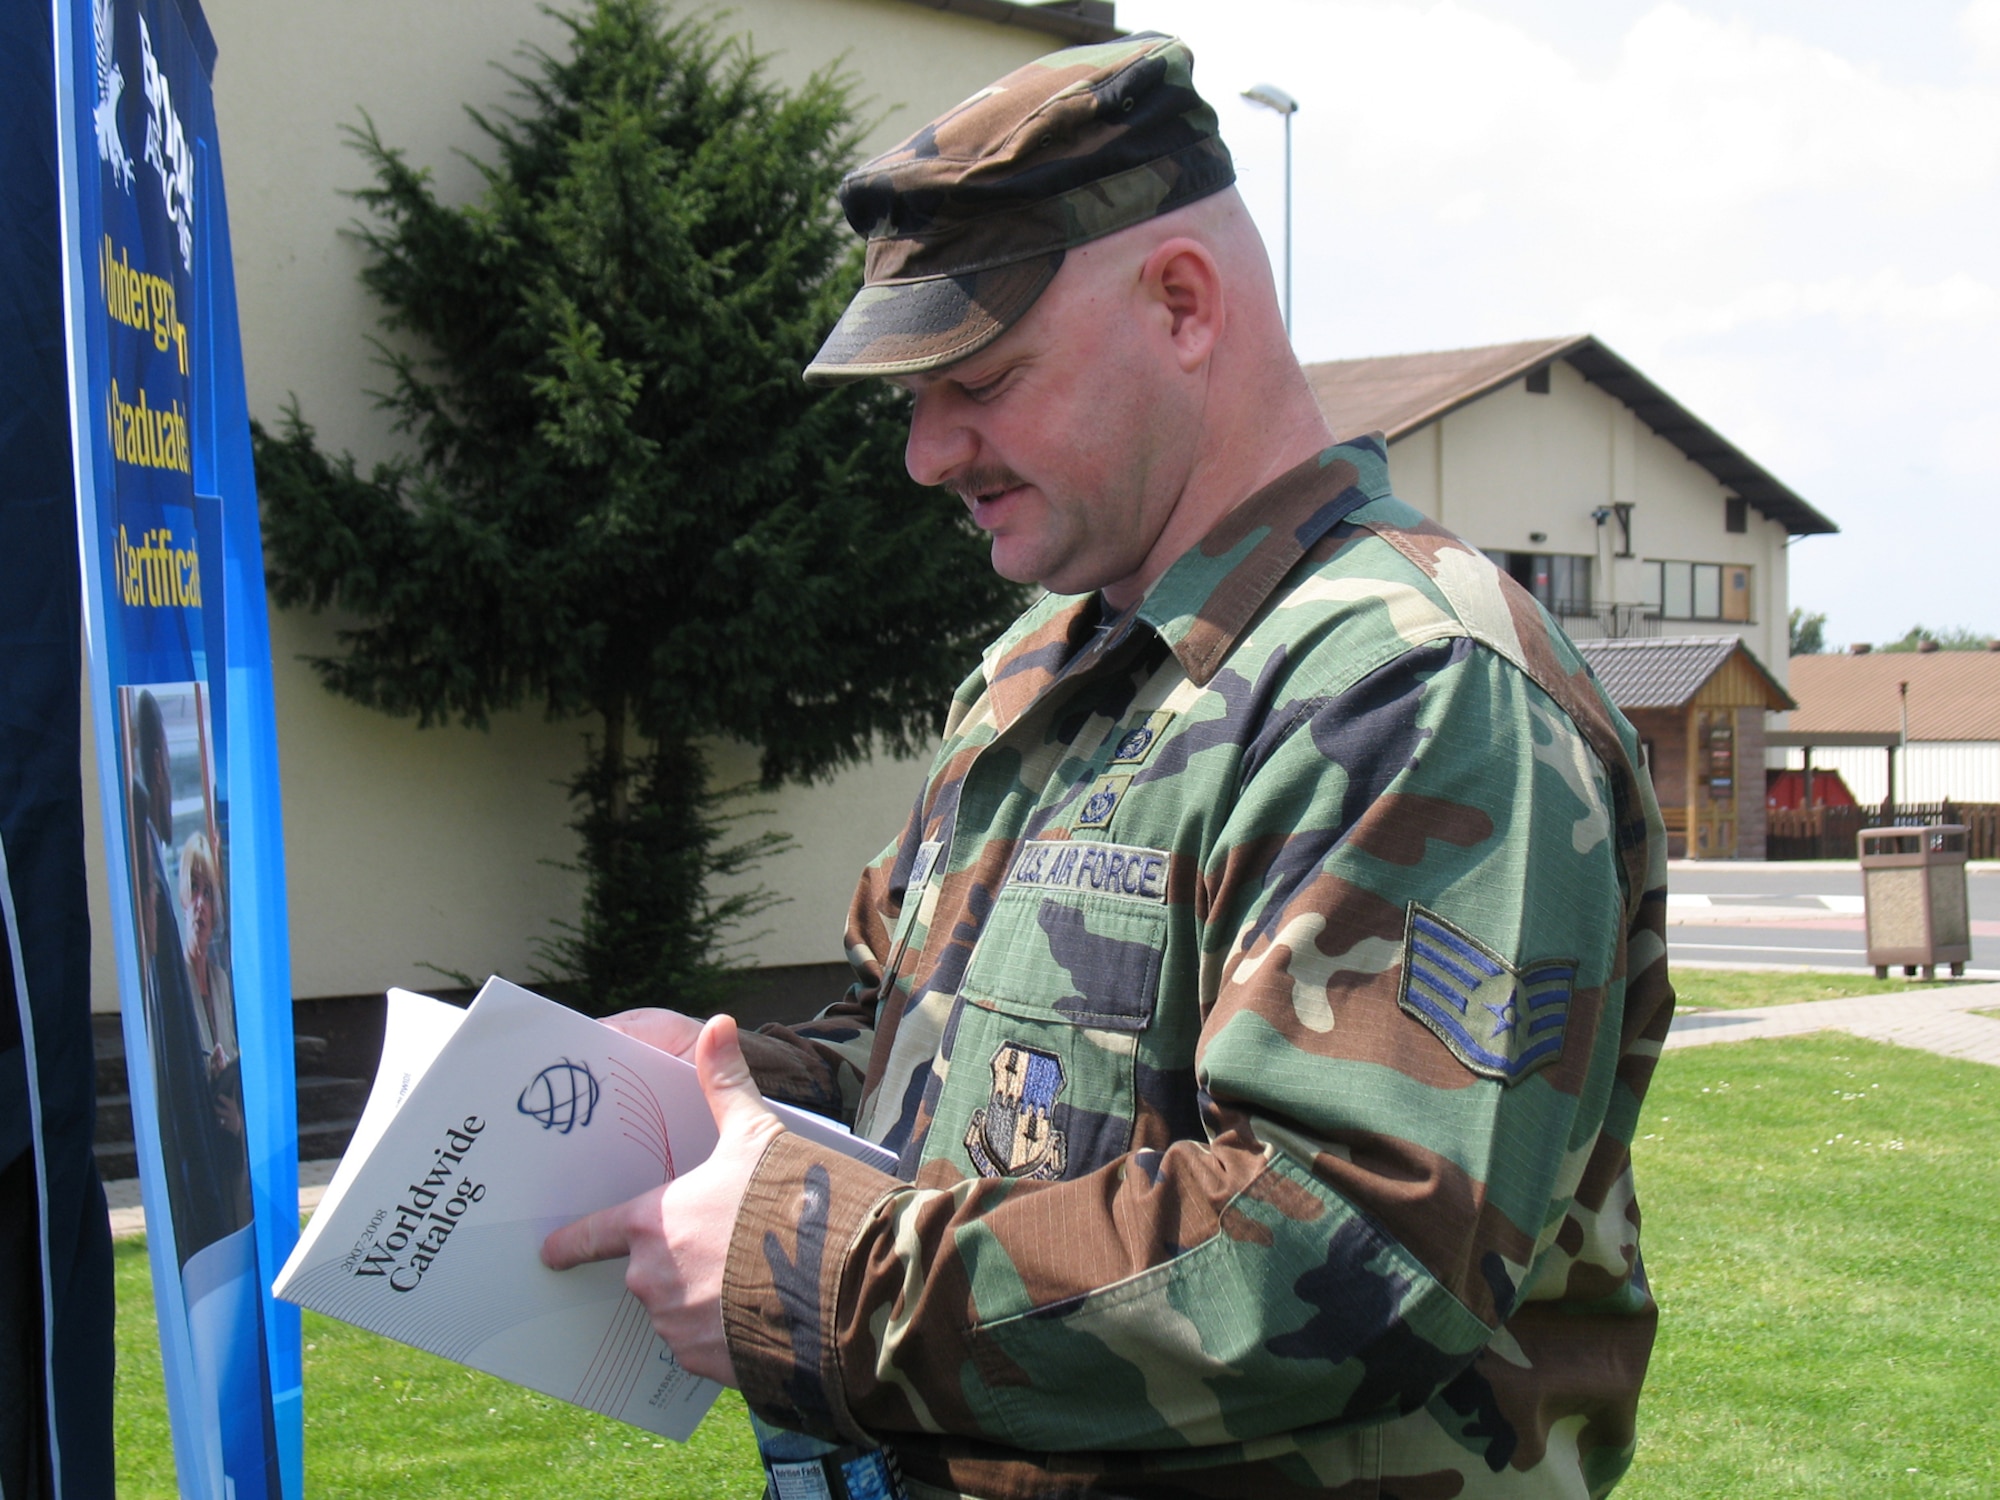 SPANGDAHLEM AIR BASE, Germany – Staff Sgt. Troy Triminal, 52nd Mission Support Squadron, reviews a broacher from Embry Riddle Aeronautical University at an education fair Aug. 3. (US Air Force photo/Staff Sgt. Tammie Moore)